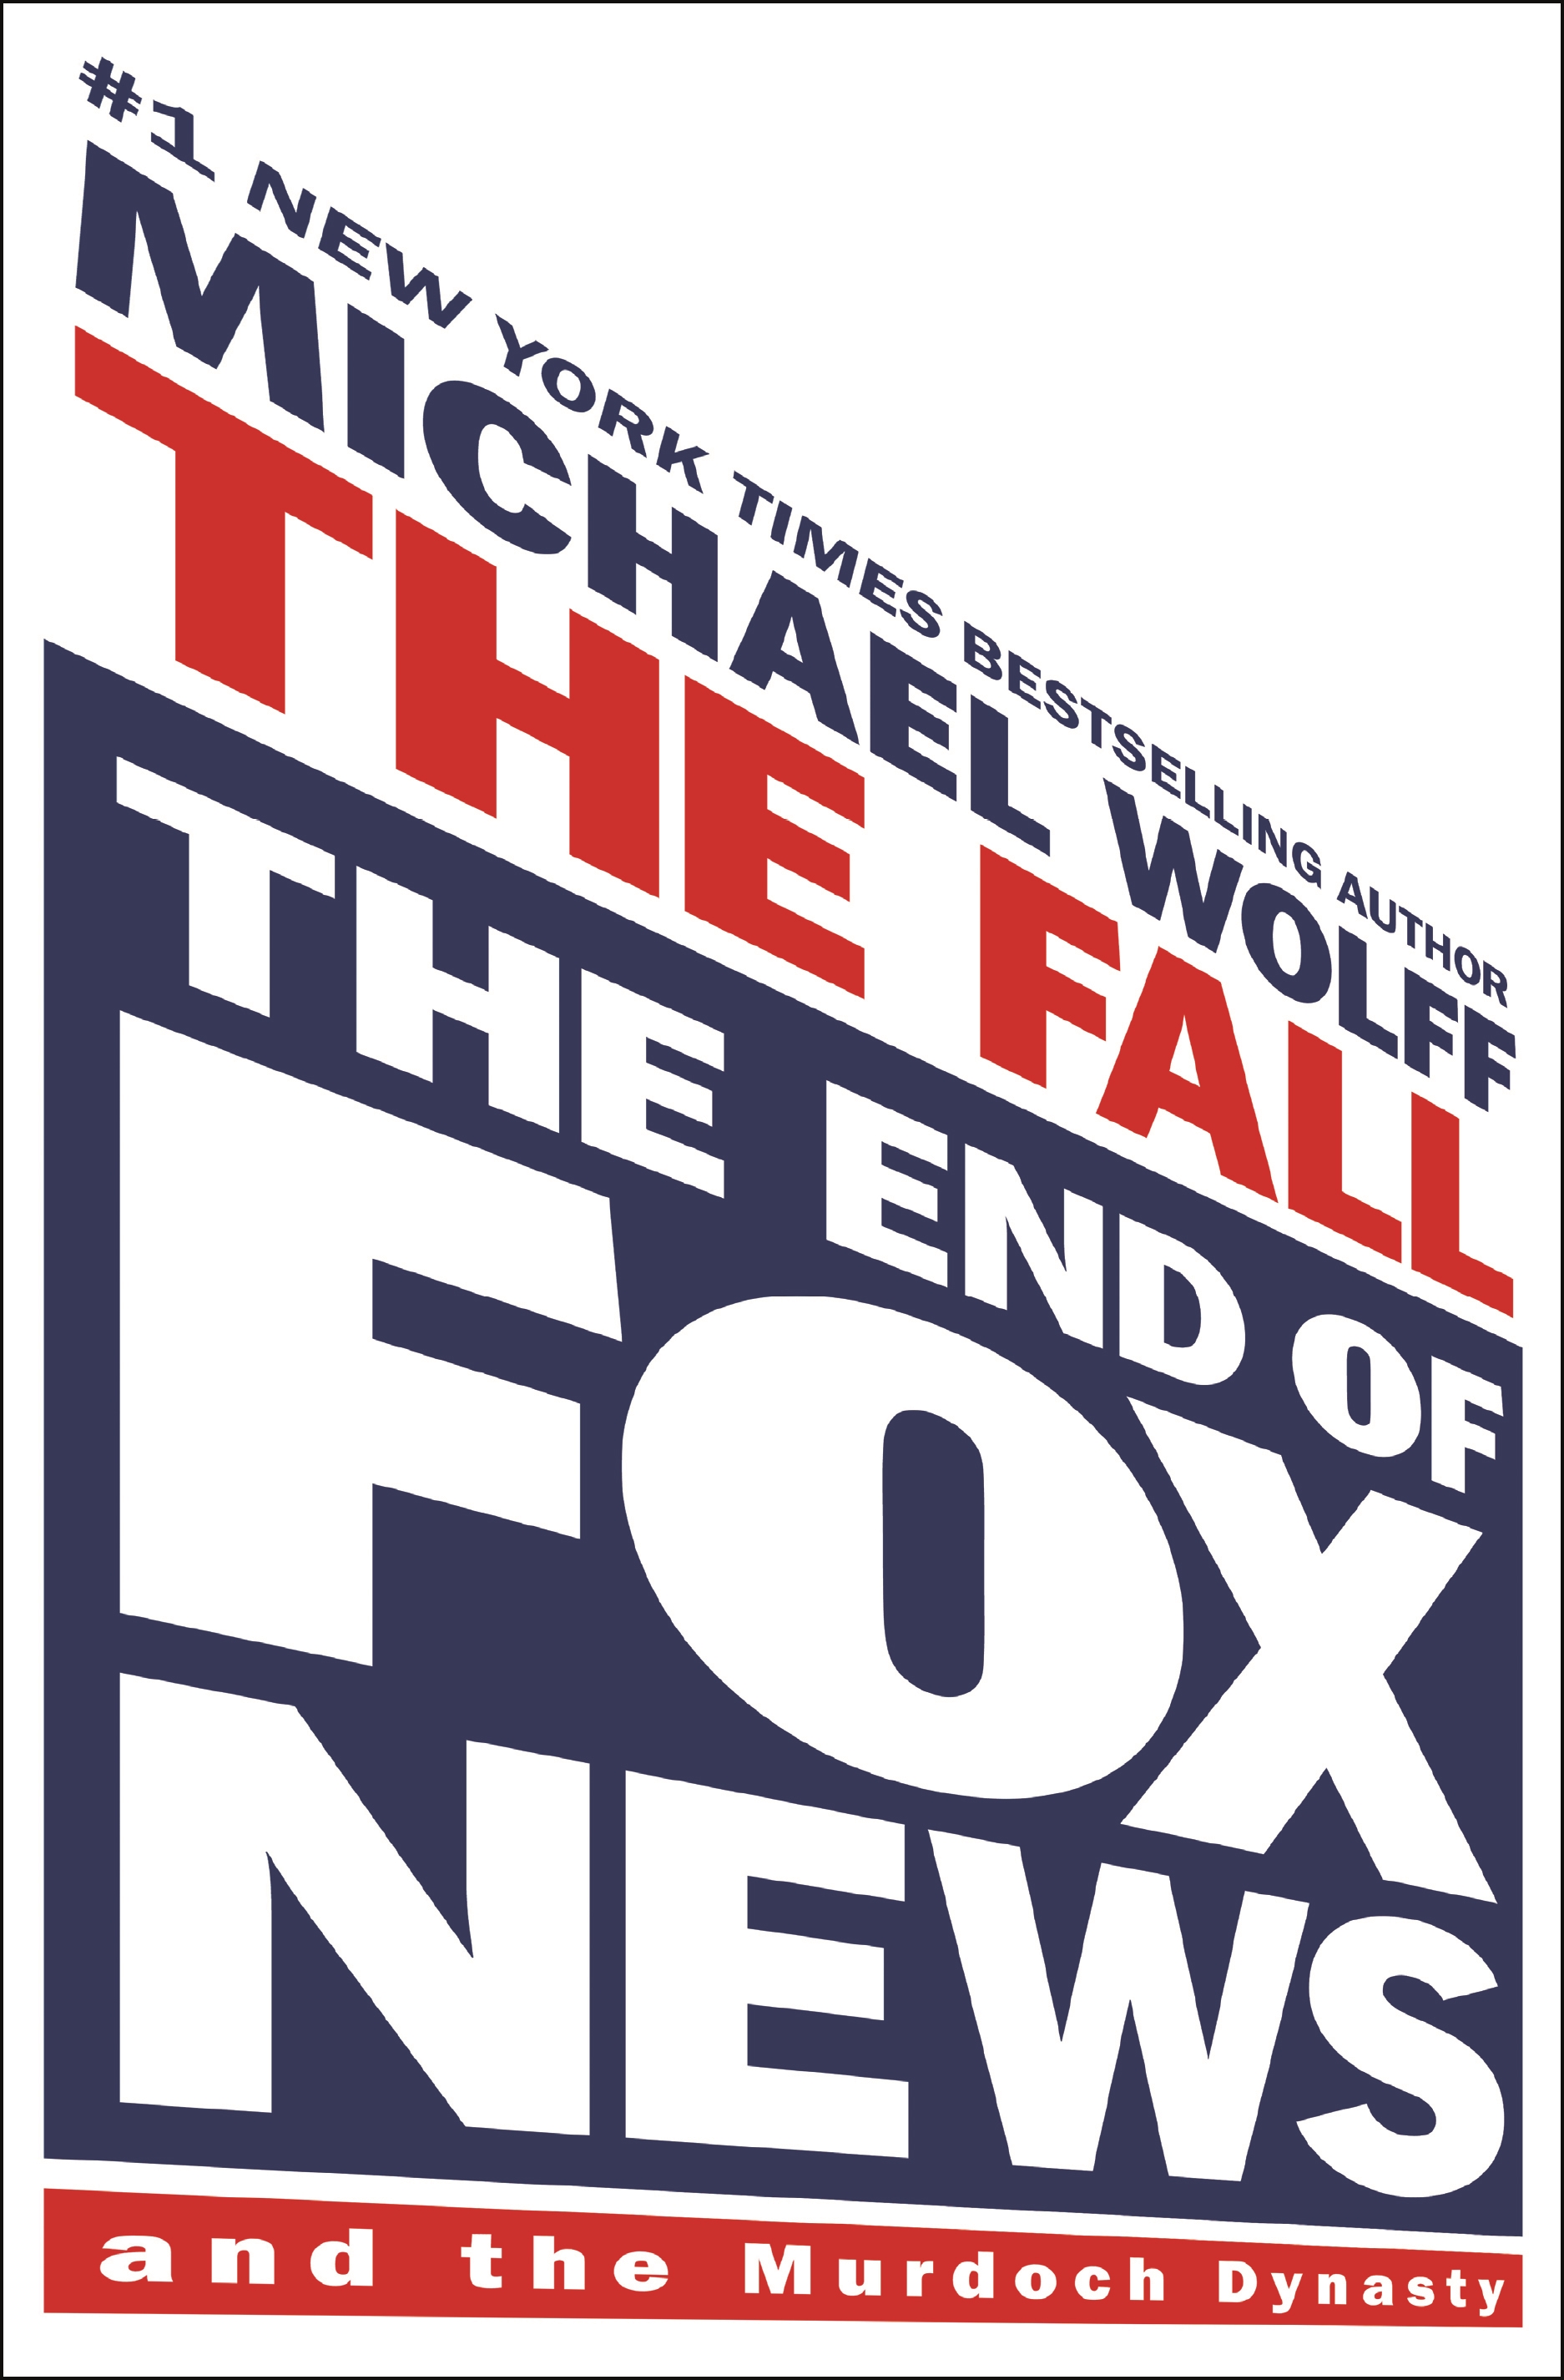 The Fall The End of Fox News and the Murdoch Dynasty cover image